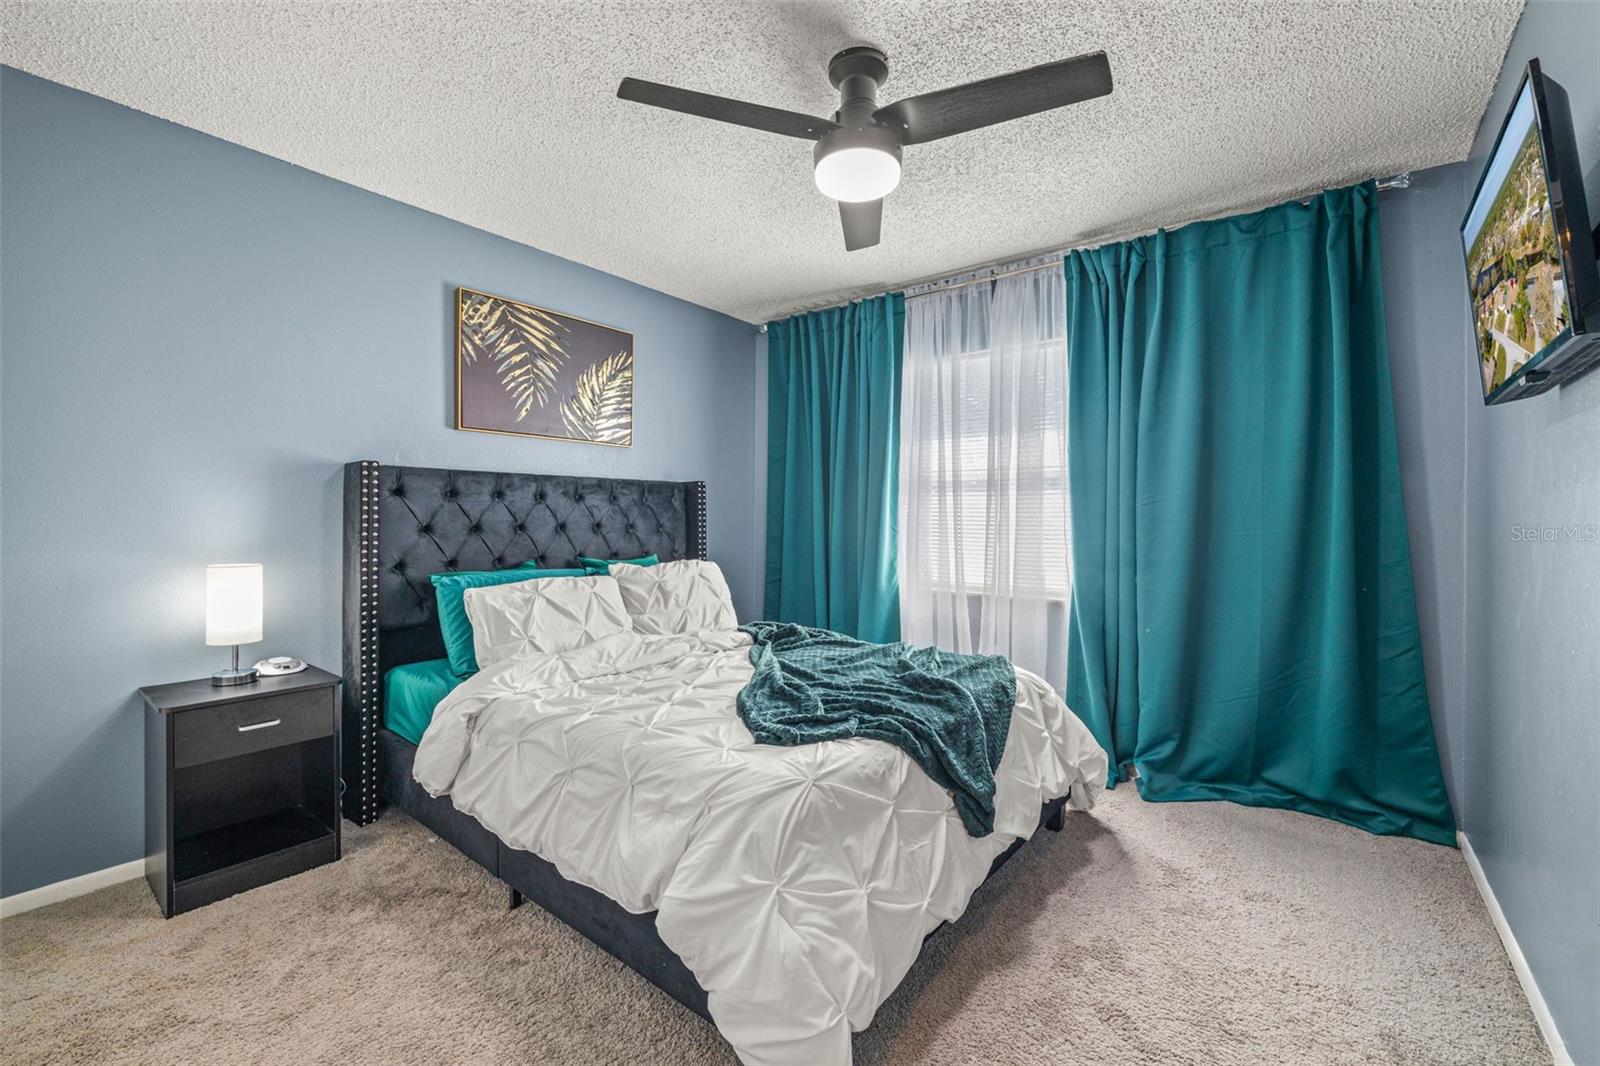 Large secondary Bedroom #2, also with on trend paint color and updated ceiling fan.